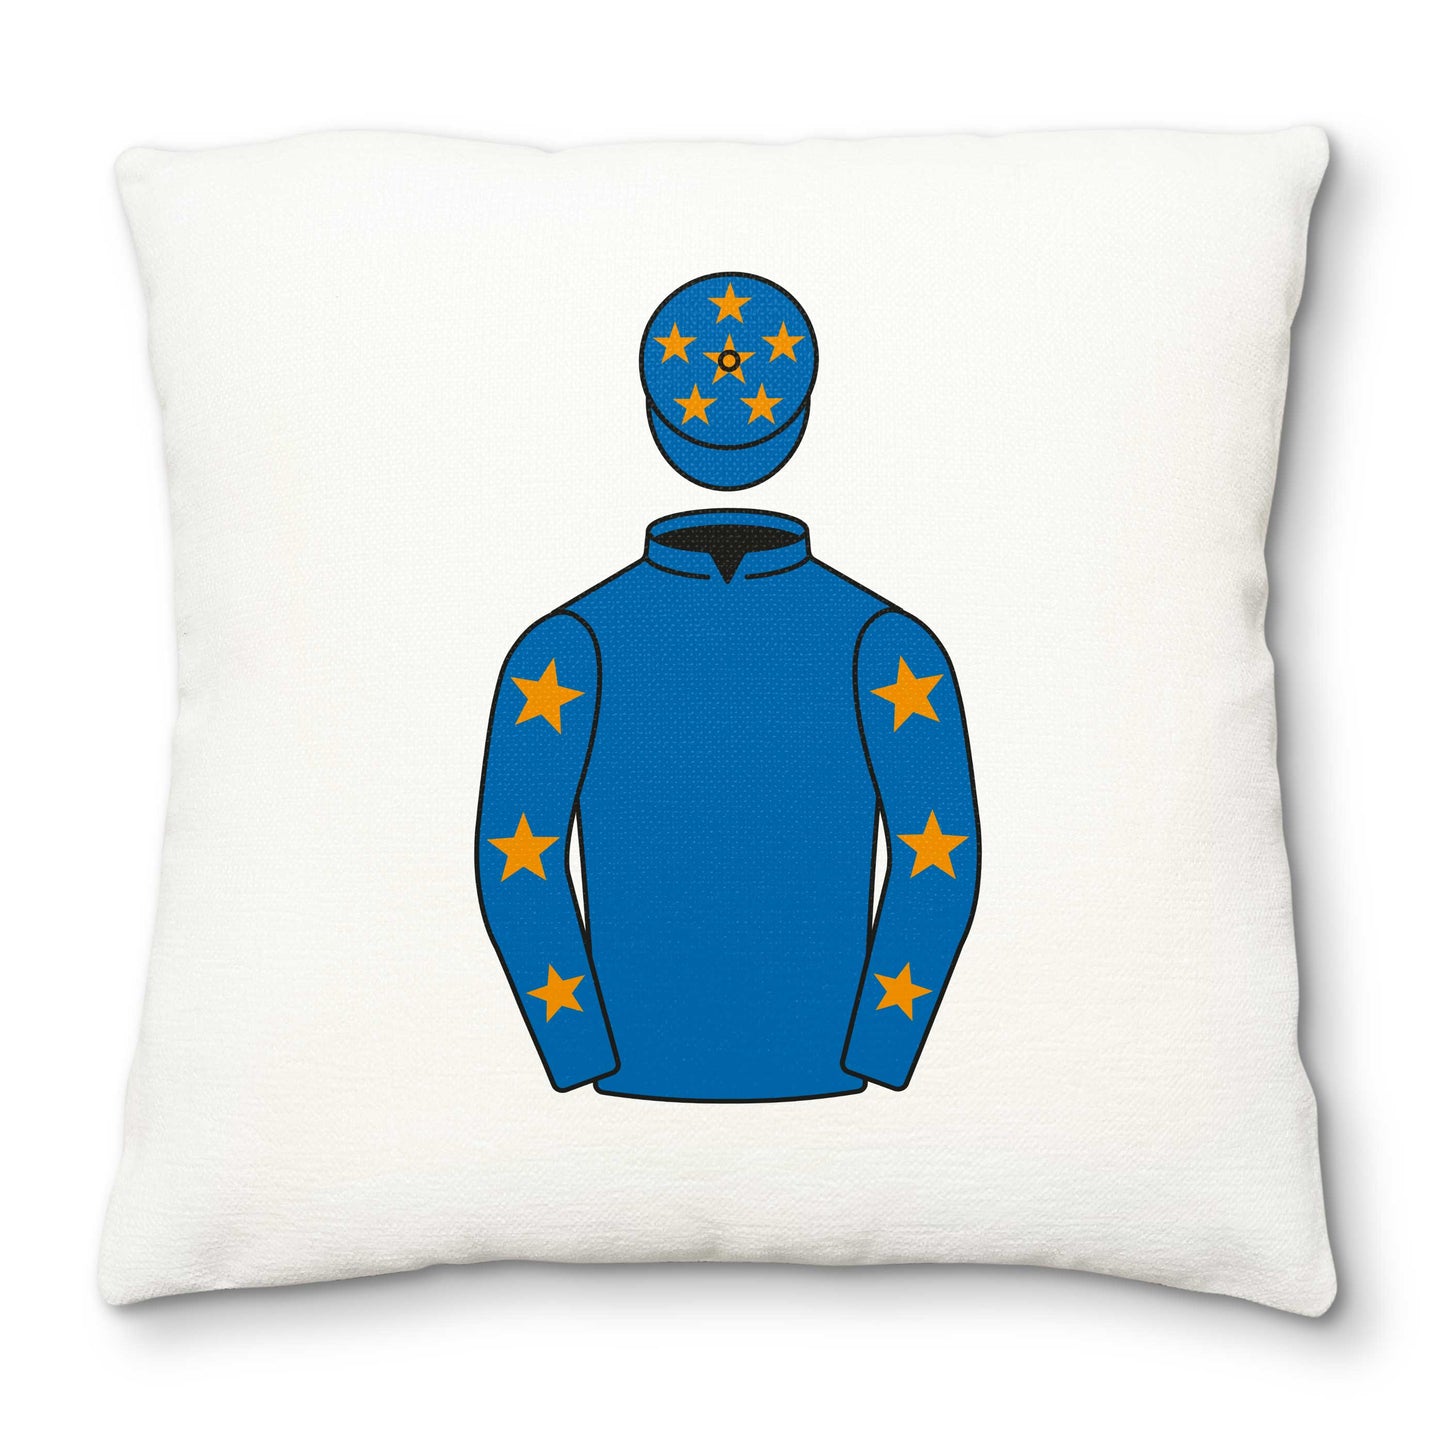 Ronan M P McNally Deluxe Cushion Cover - Hacked Up